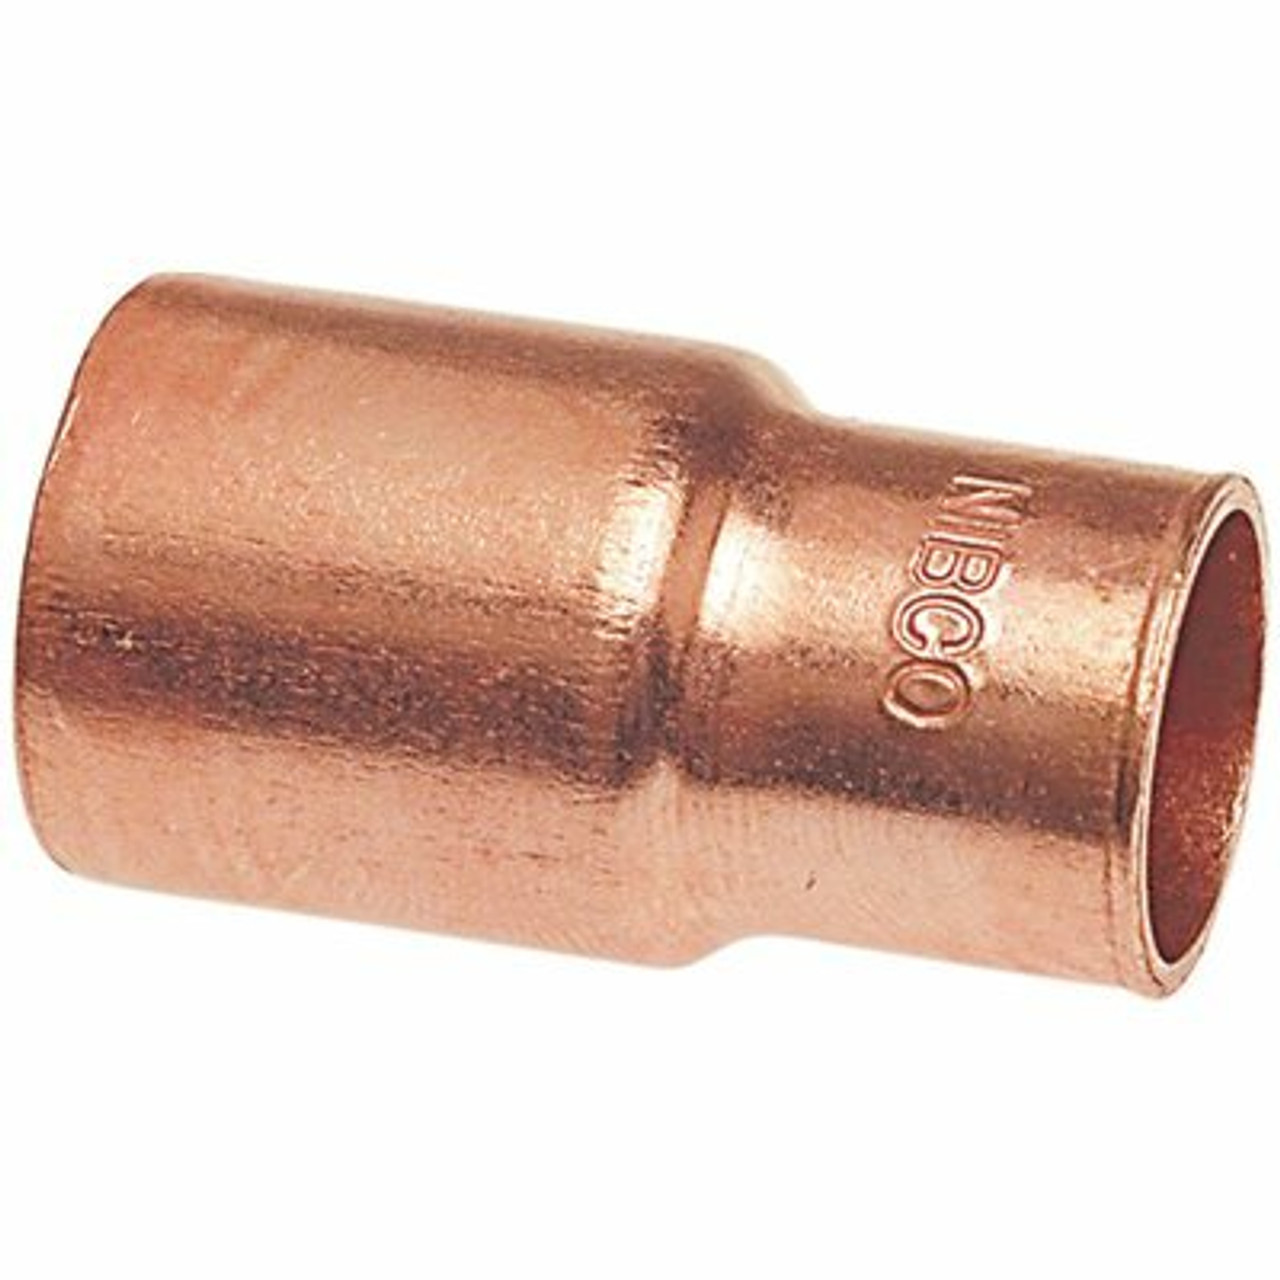 Nibco 3/4 In. X 1/2 In. Wrot Copper Ftg X C Reducing Fitting (25-Pack)